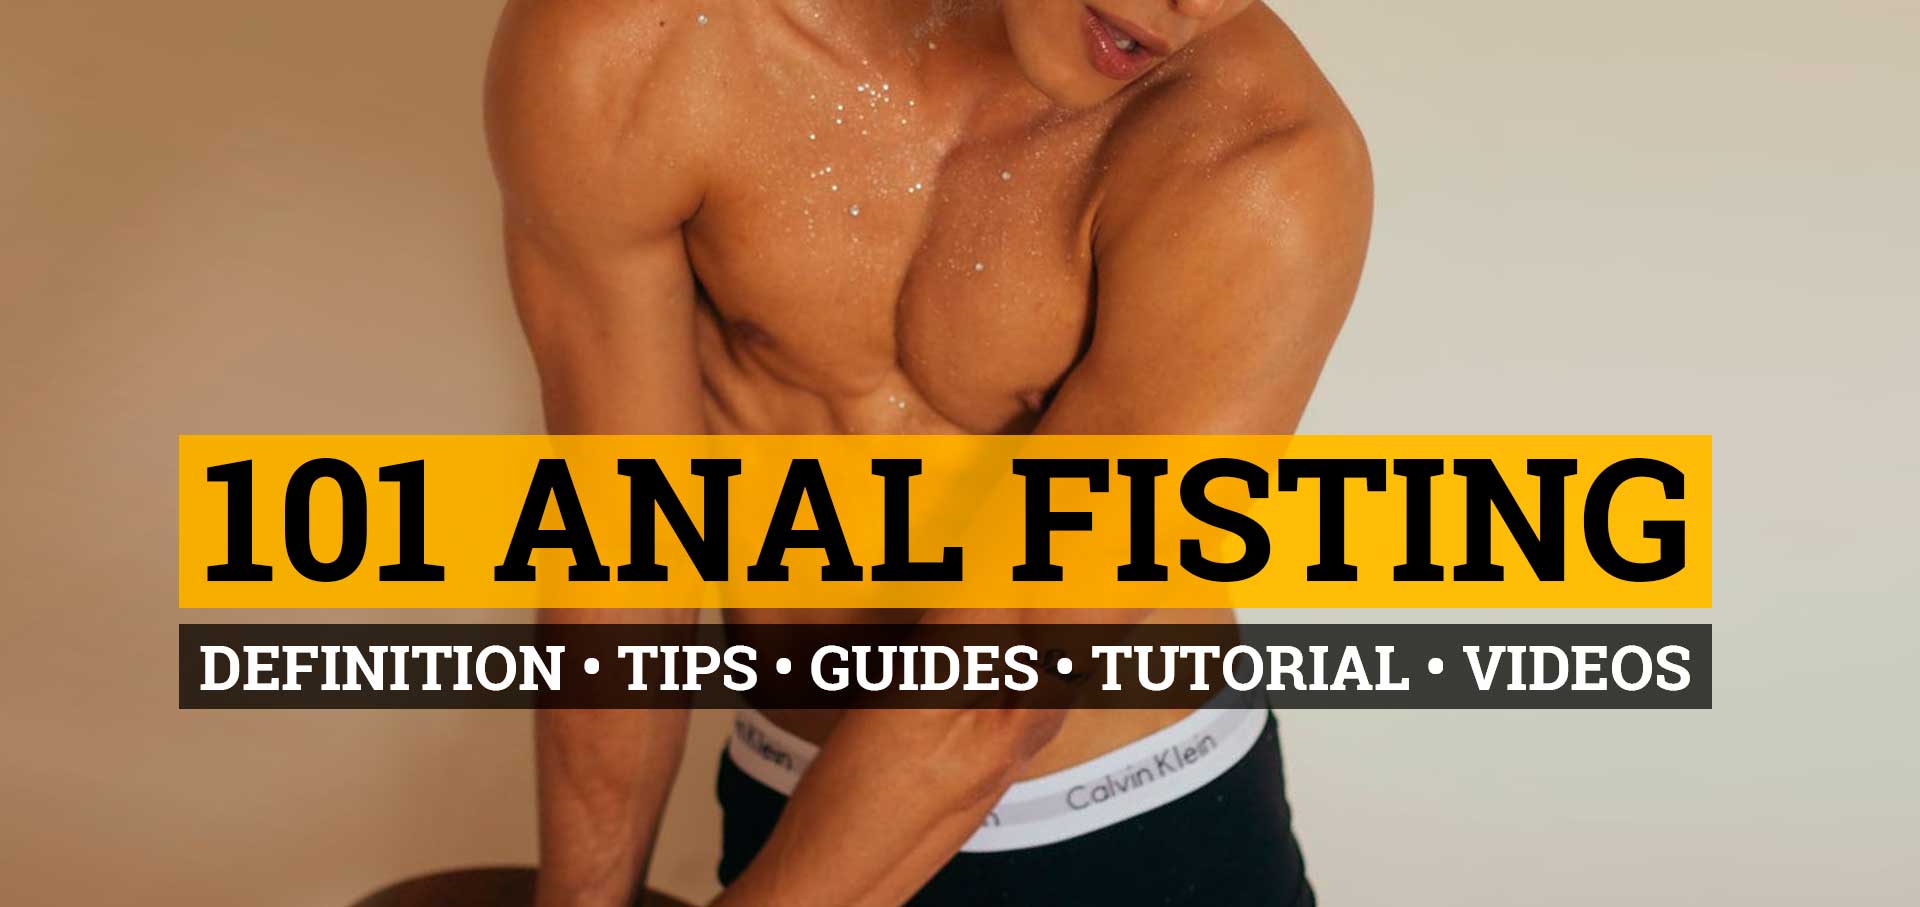 Monarch reccomend anal tutorial beginners